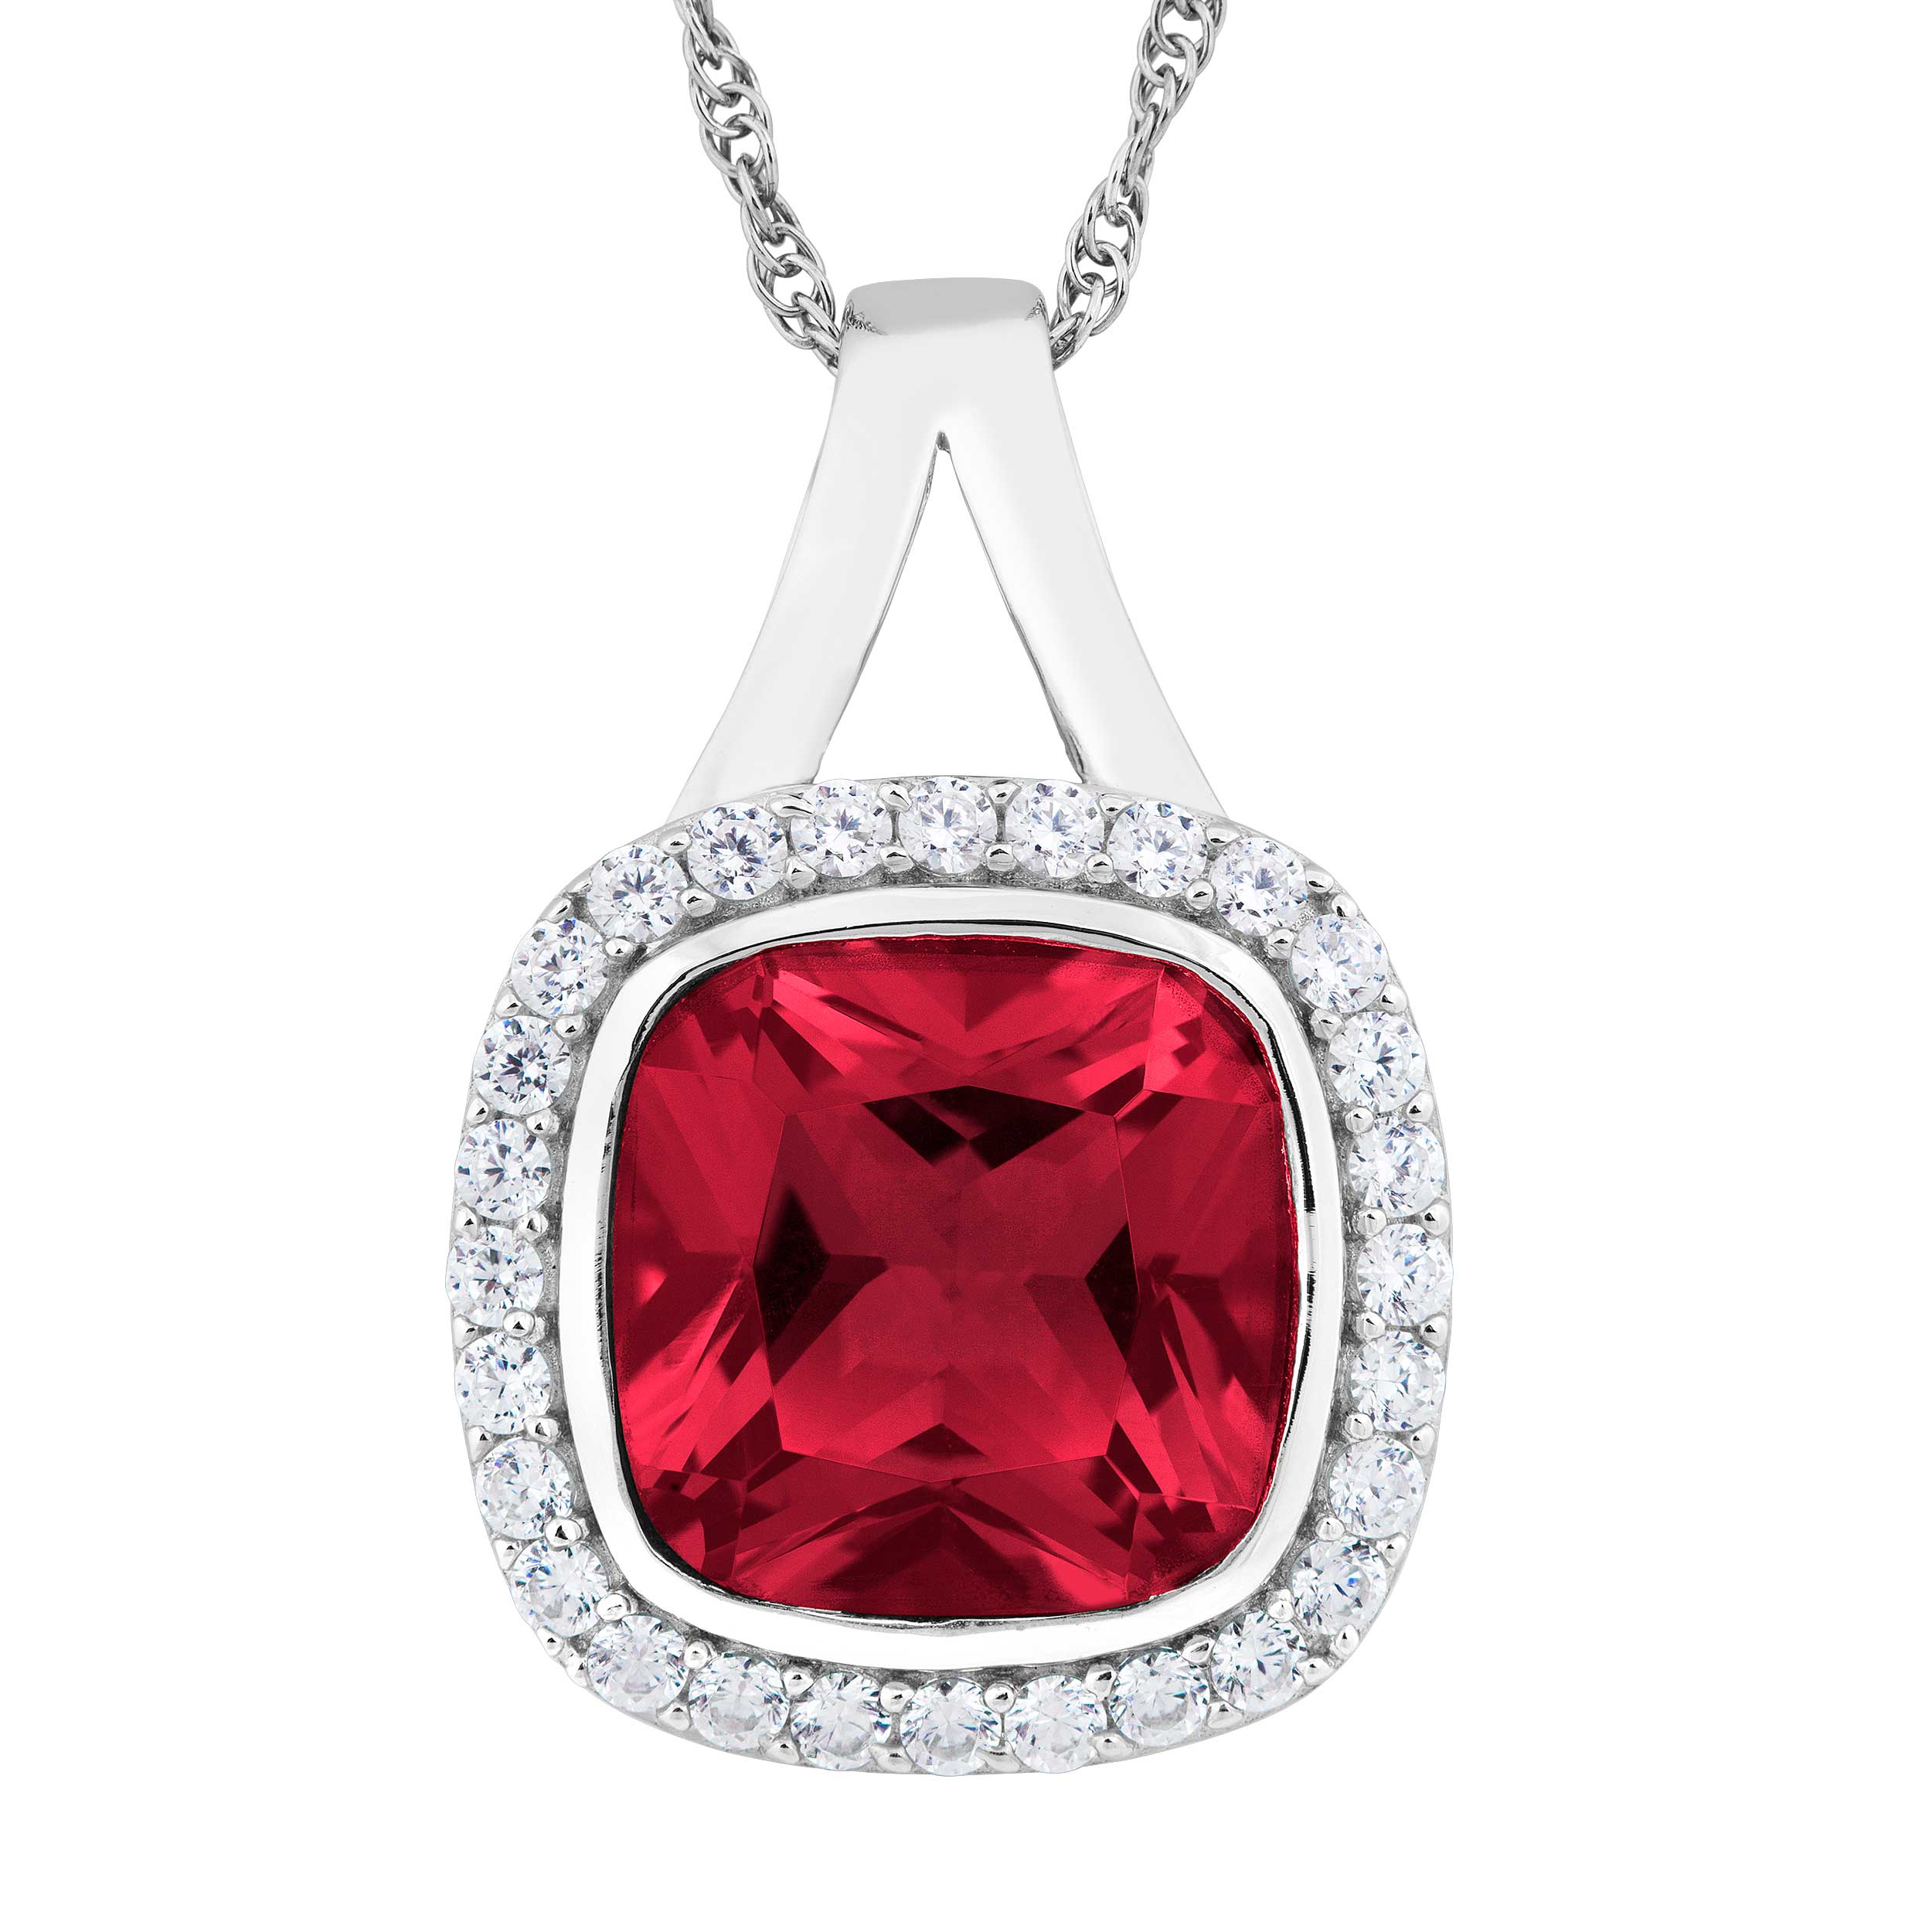 Inlaid Cushion-Cut Created Ruby and White Topaz Stud Pendant Necklace, Rhodium Plated Sterling Silver